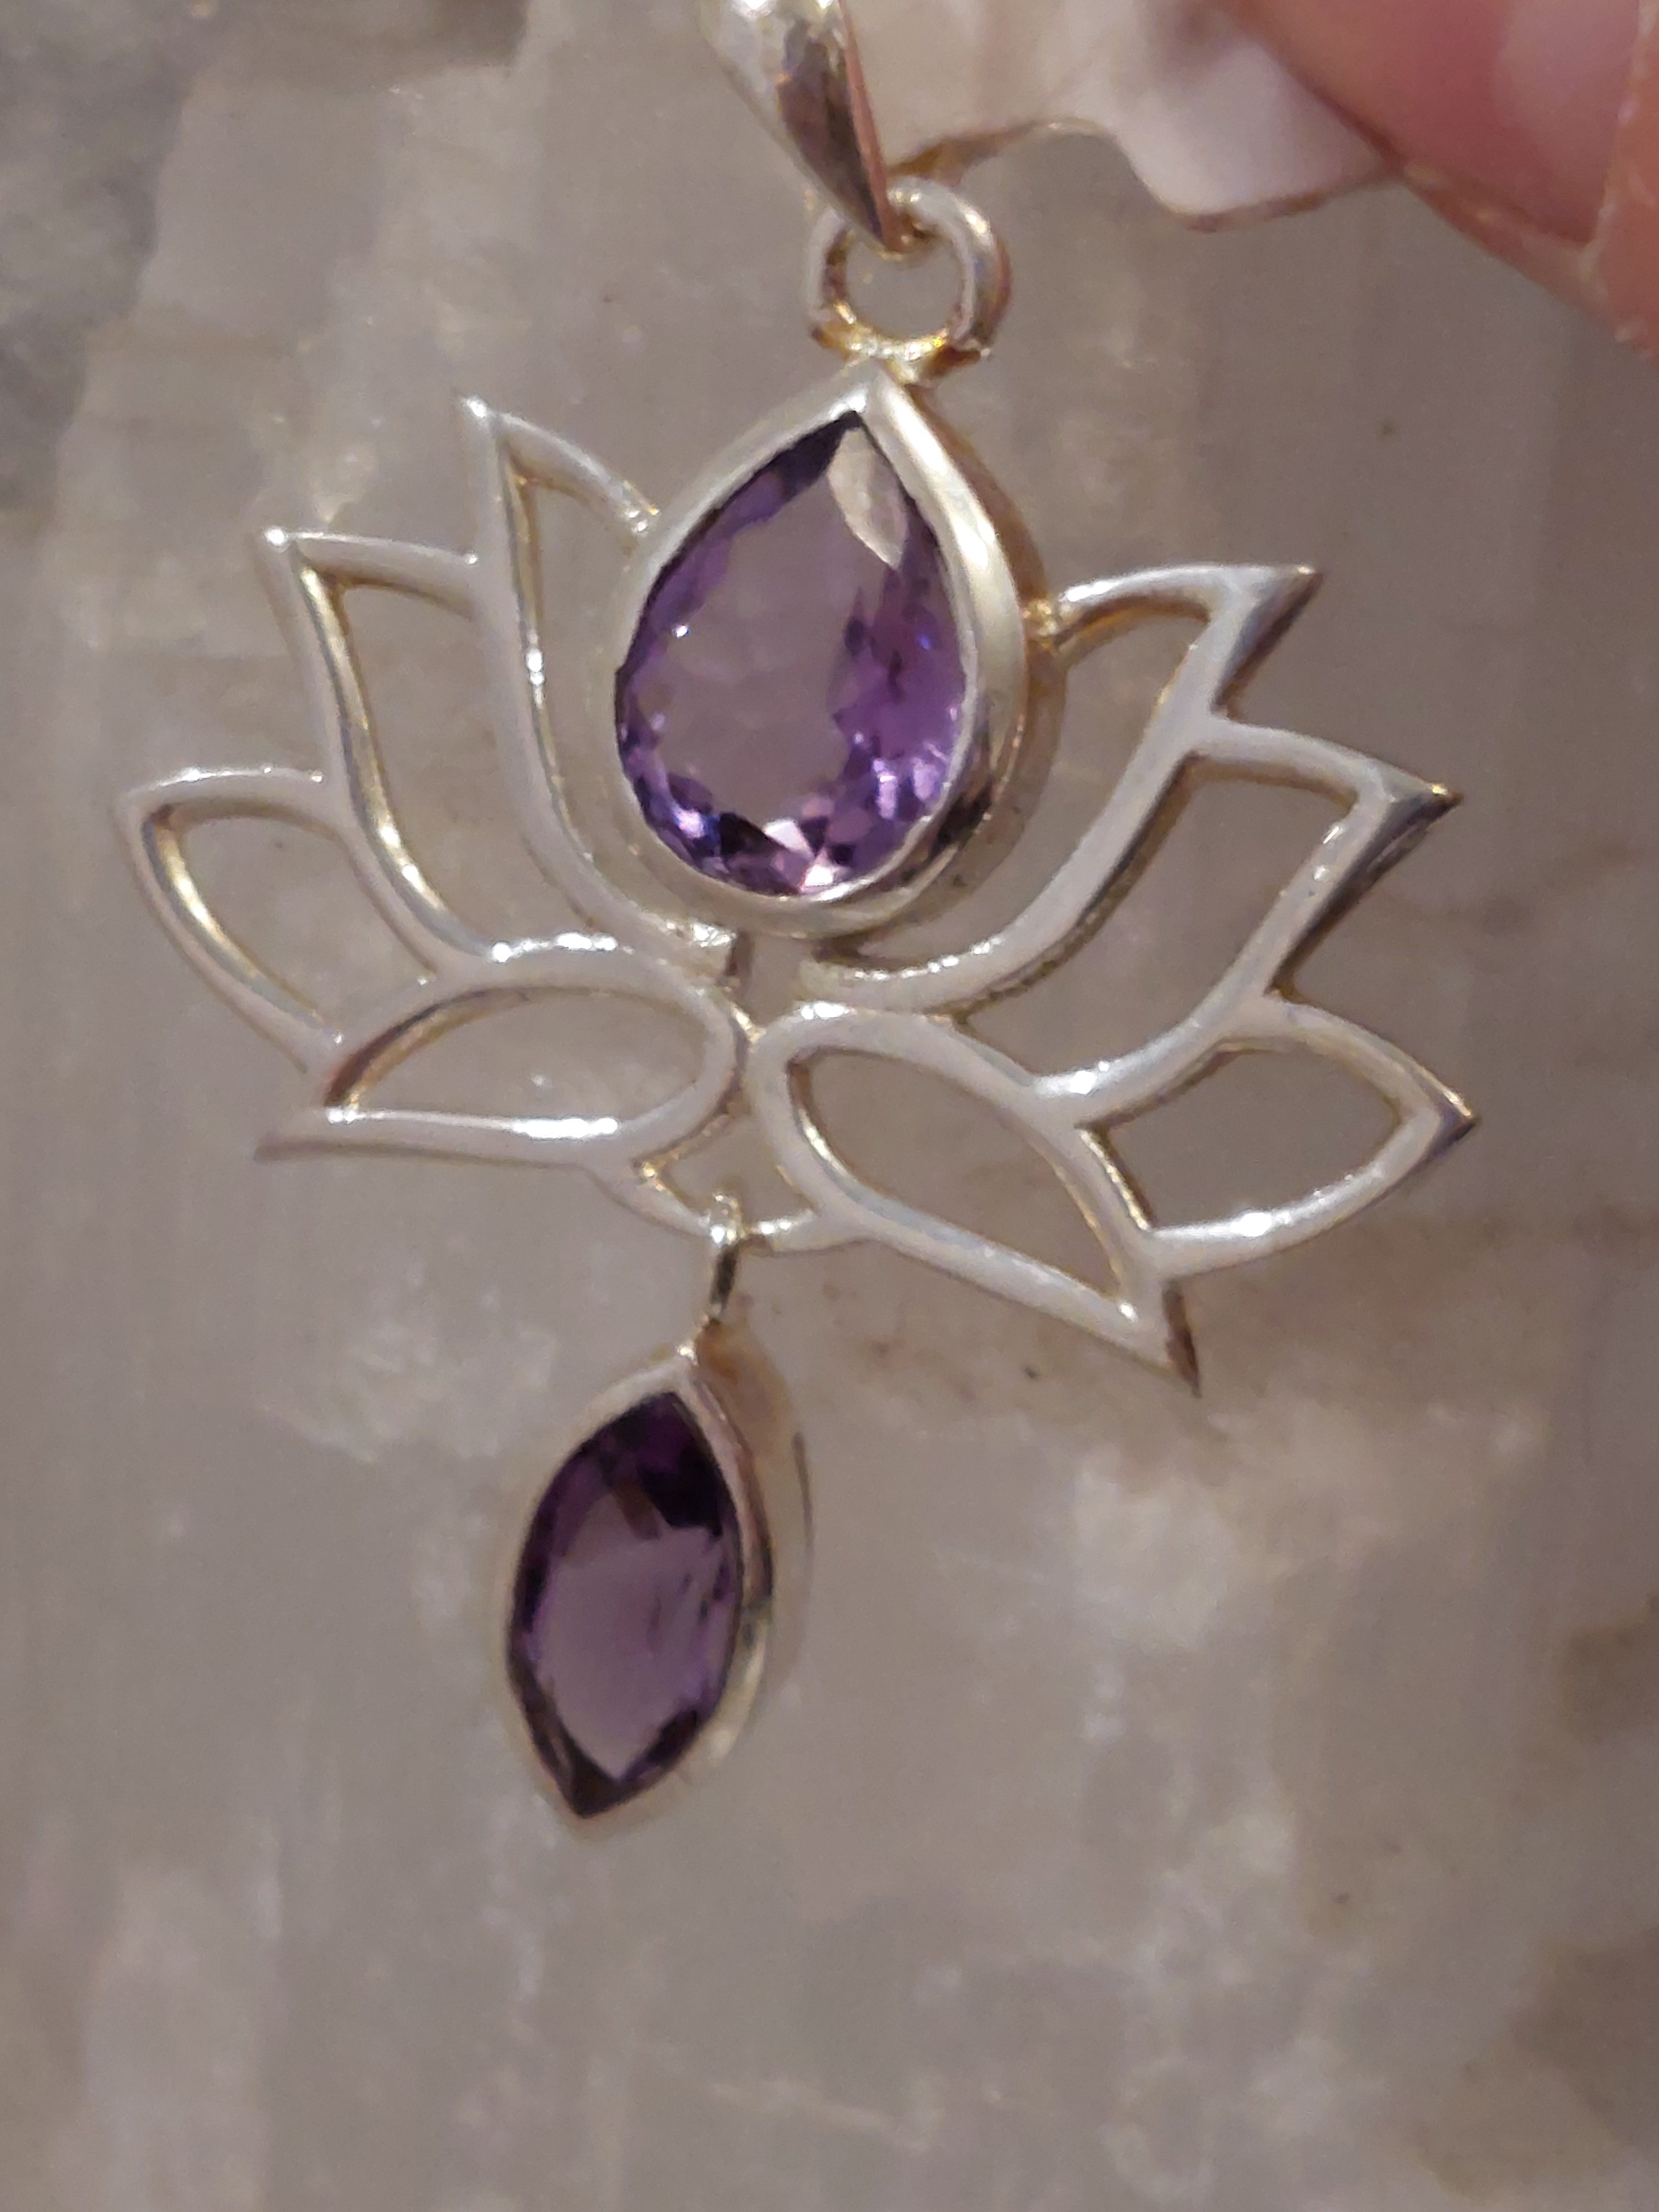 Lotus Flower Pendant with Faceted Amethyst - 925 Sterling Silver